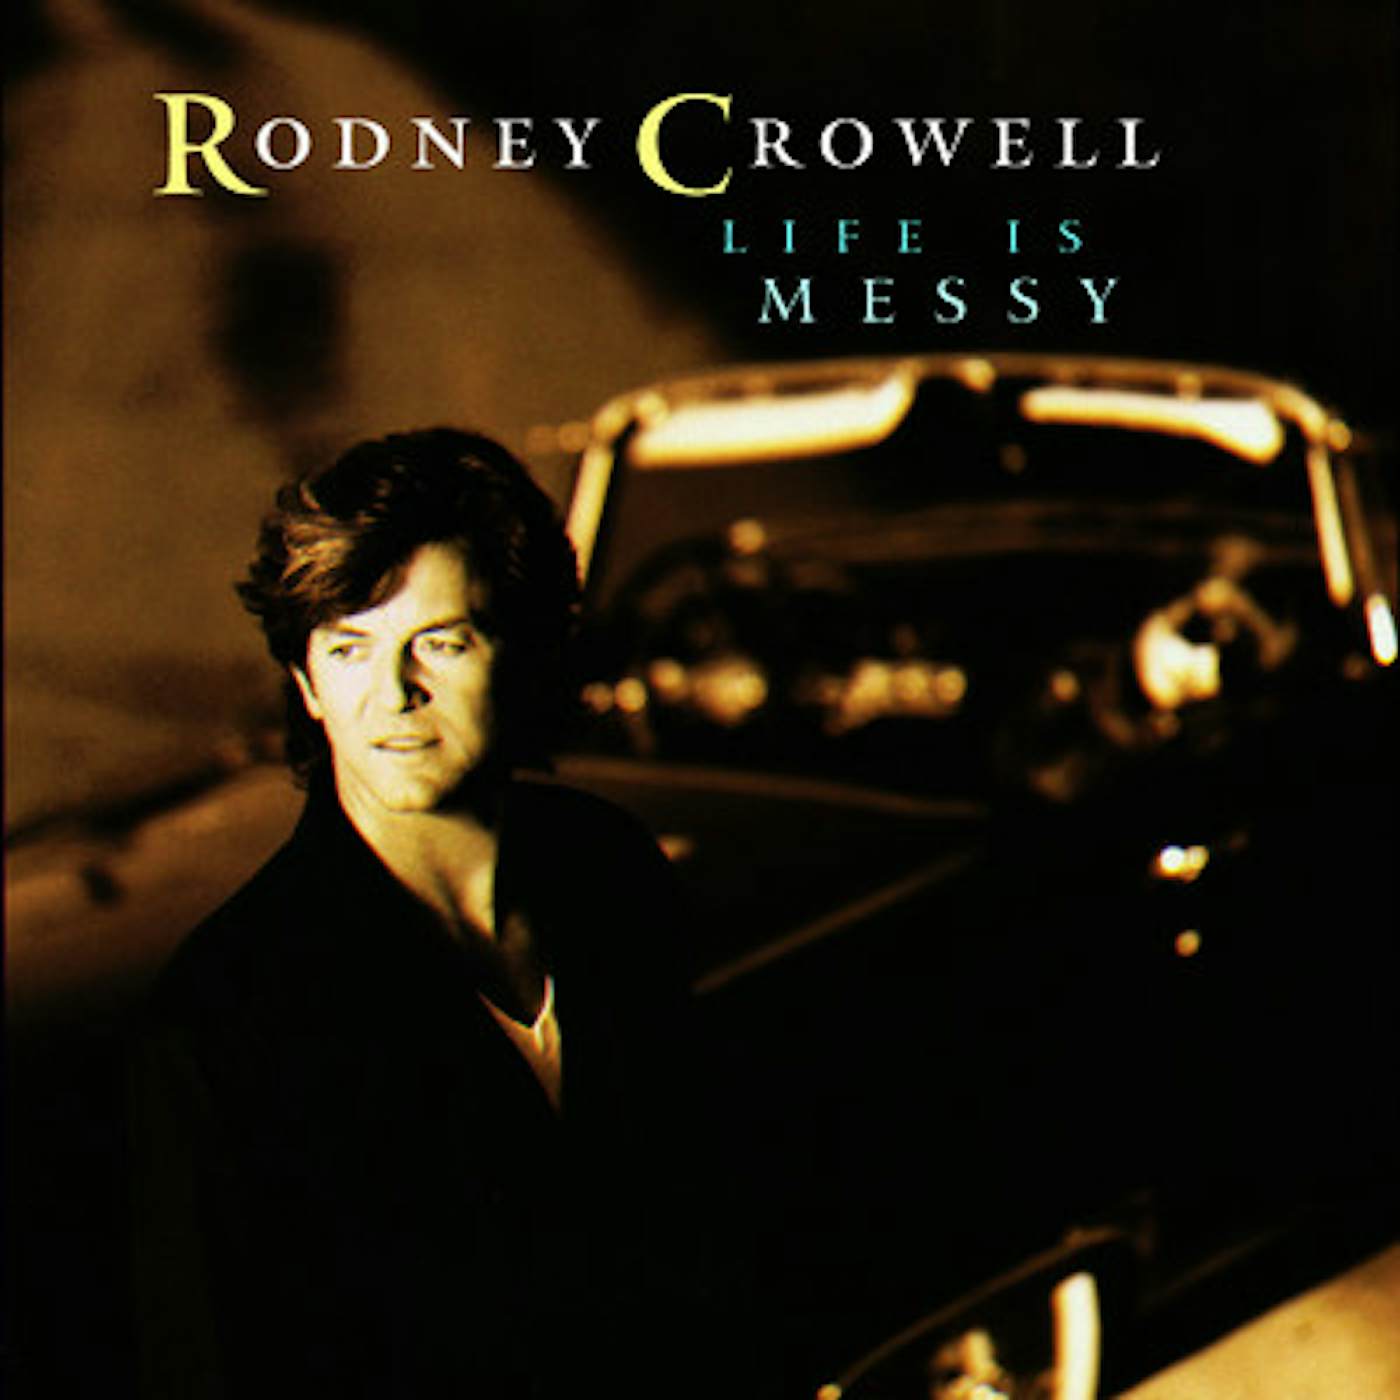 Rodney Crowell LIFE IS MESSY CD